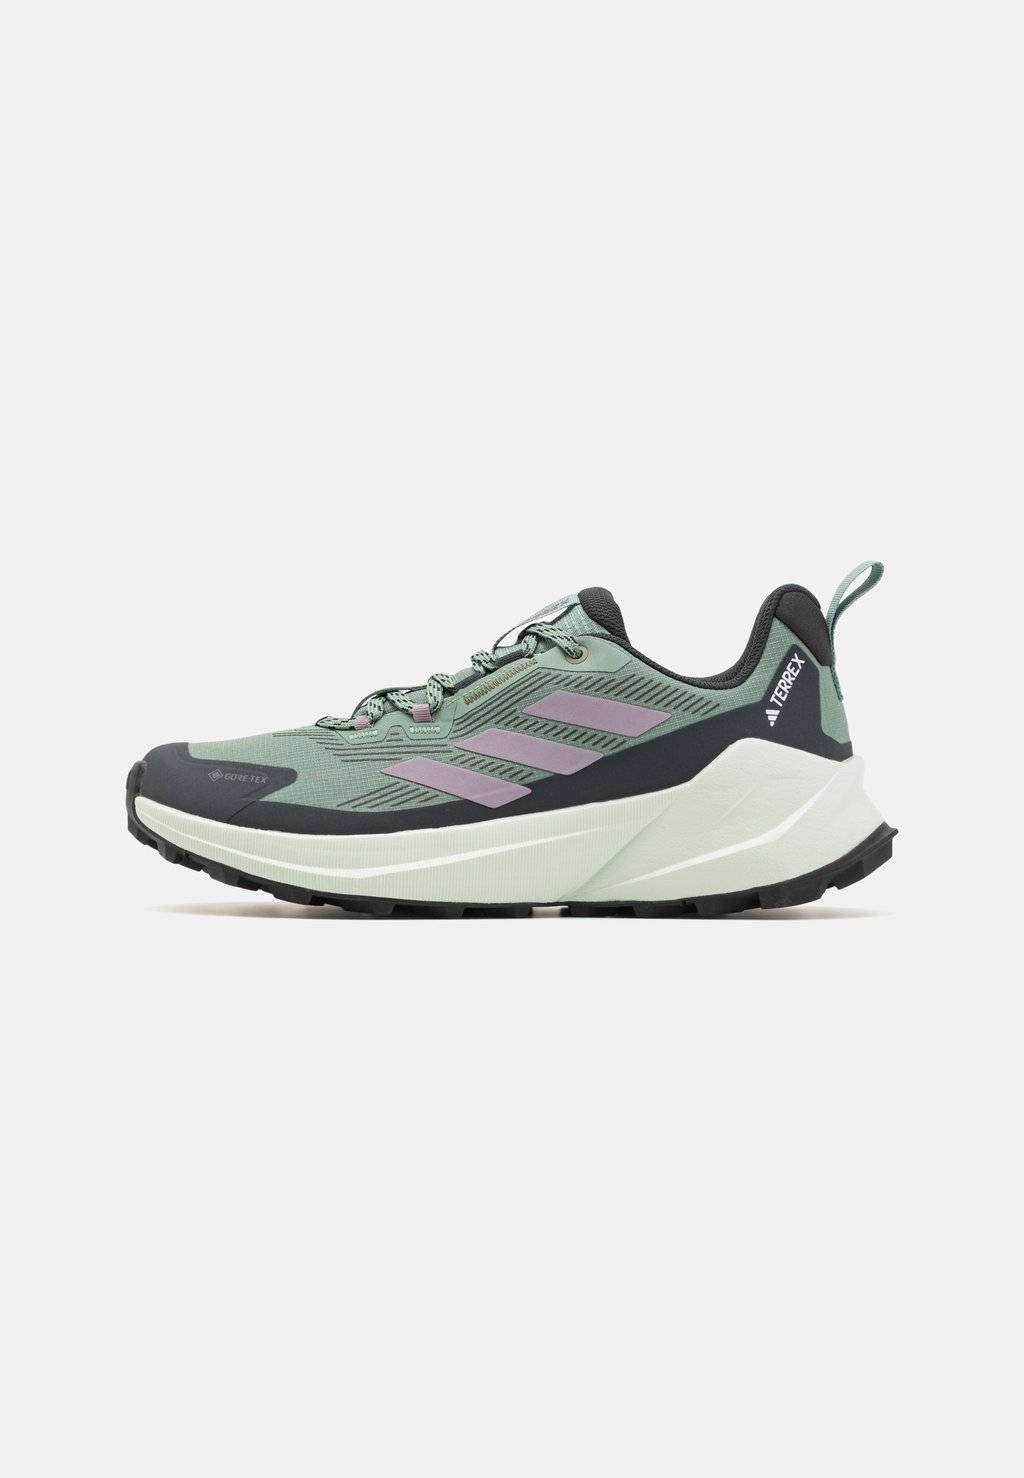 Кроссовки TRAILMAKER 2 GORE-TEX SHOES Adidas Terrex, цвет silver green/preloved fig/crystal jade kjjeaxcmy boutique jewelry s925 pure silver white yellow green chalcedony pomegranate red jade silver antique simple